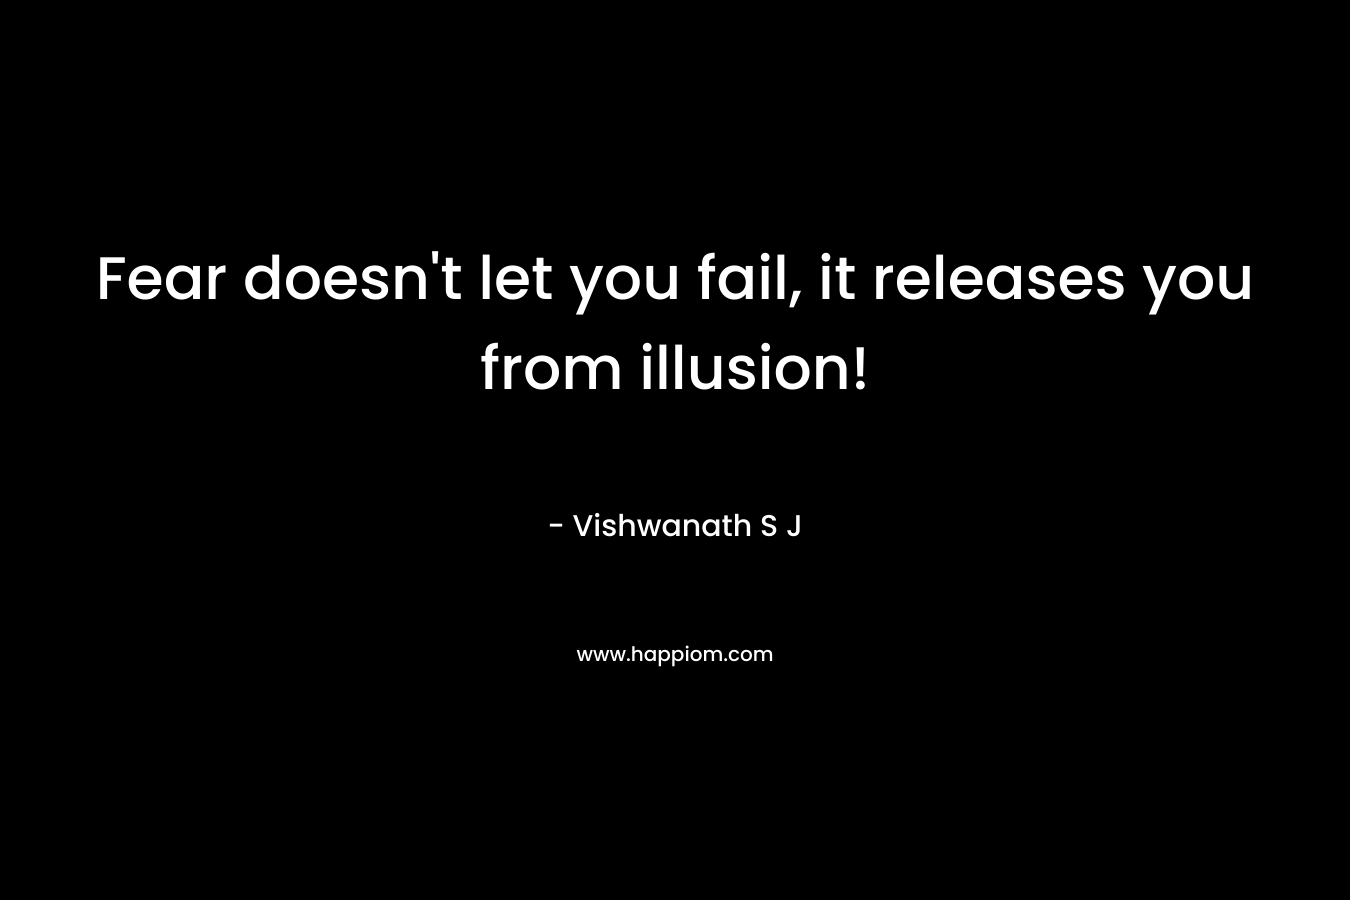 Fear doesn't let you fail, it releases you from illusion!